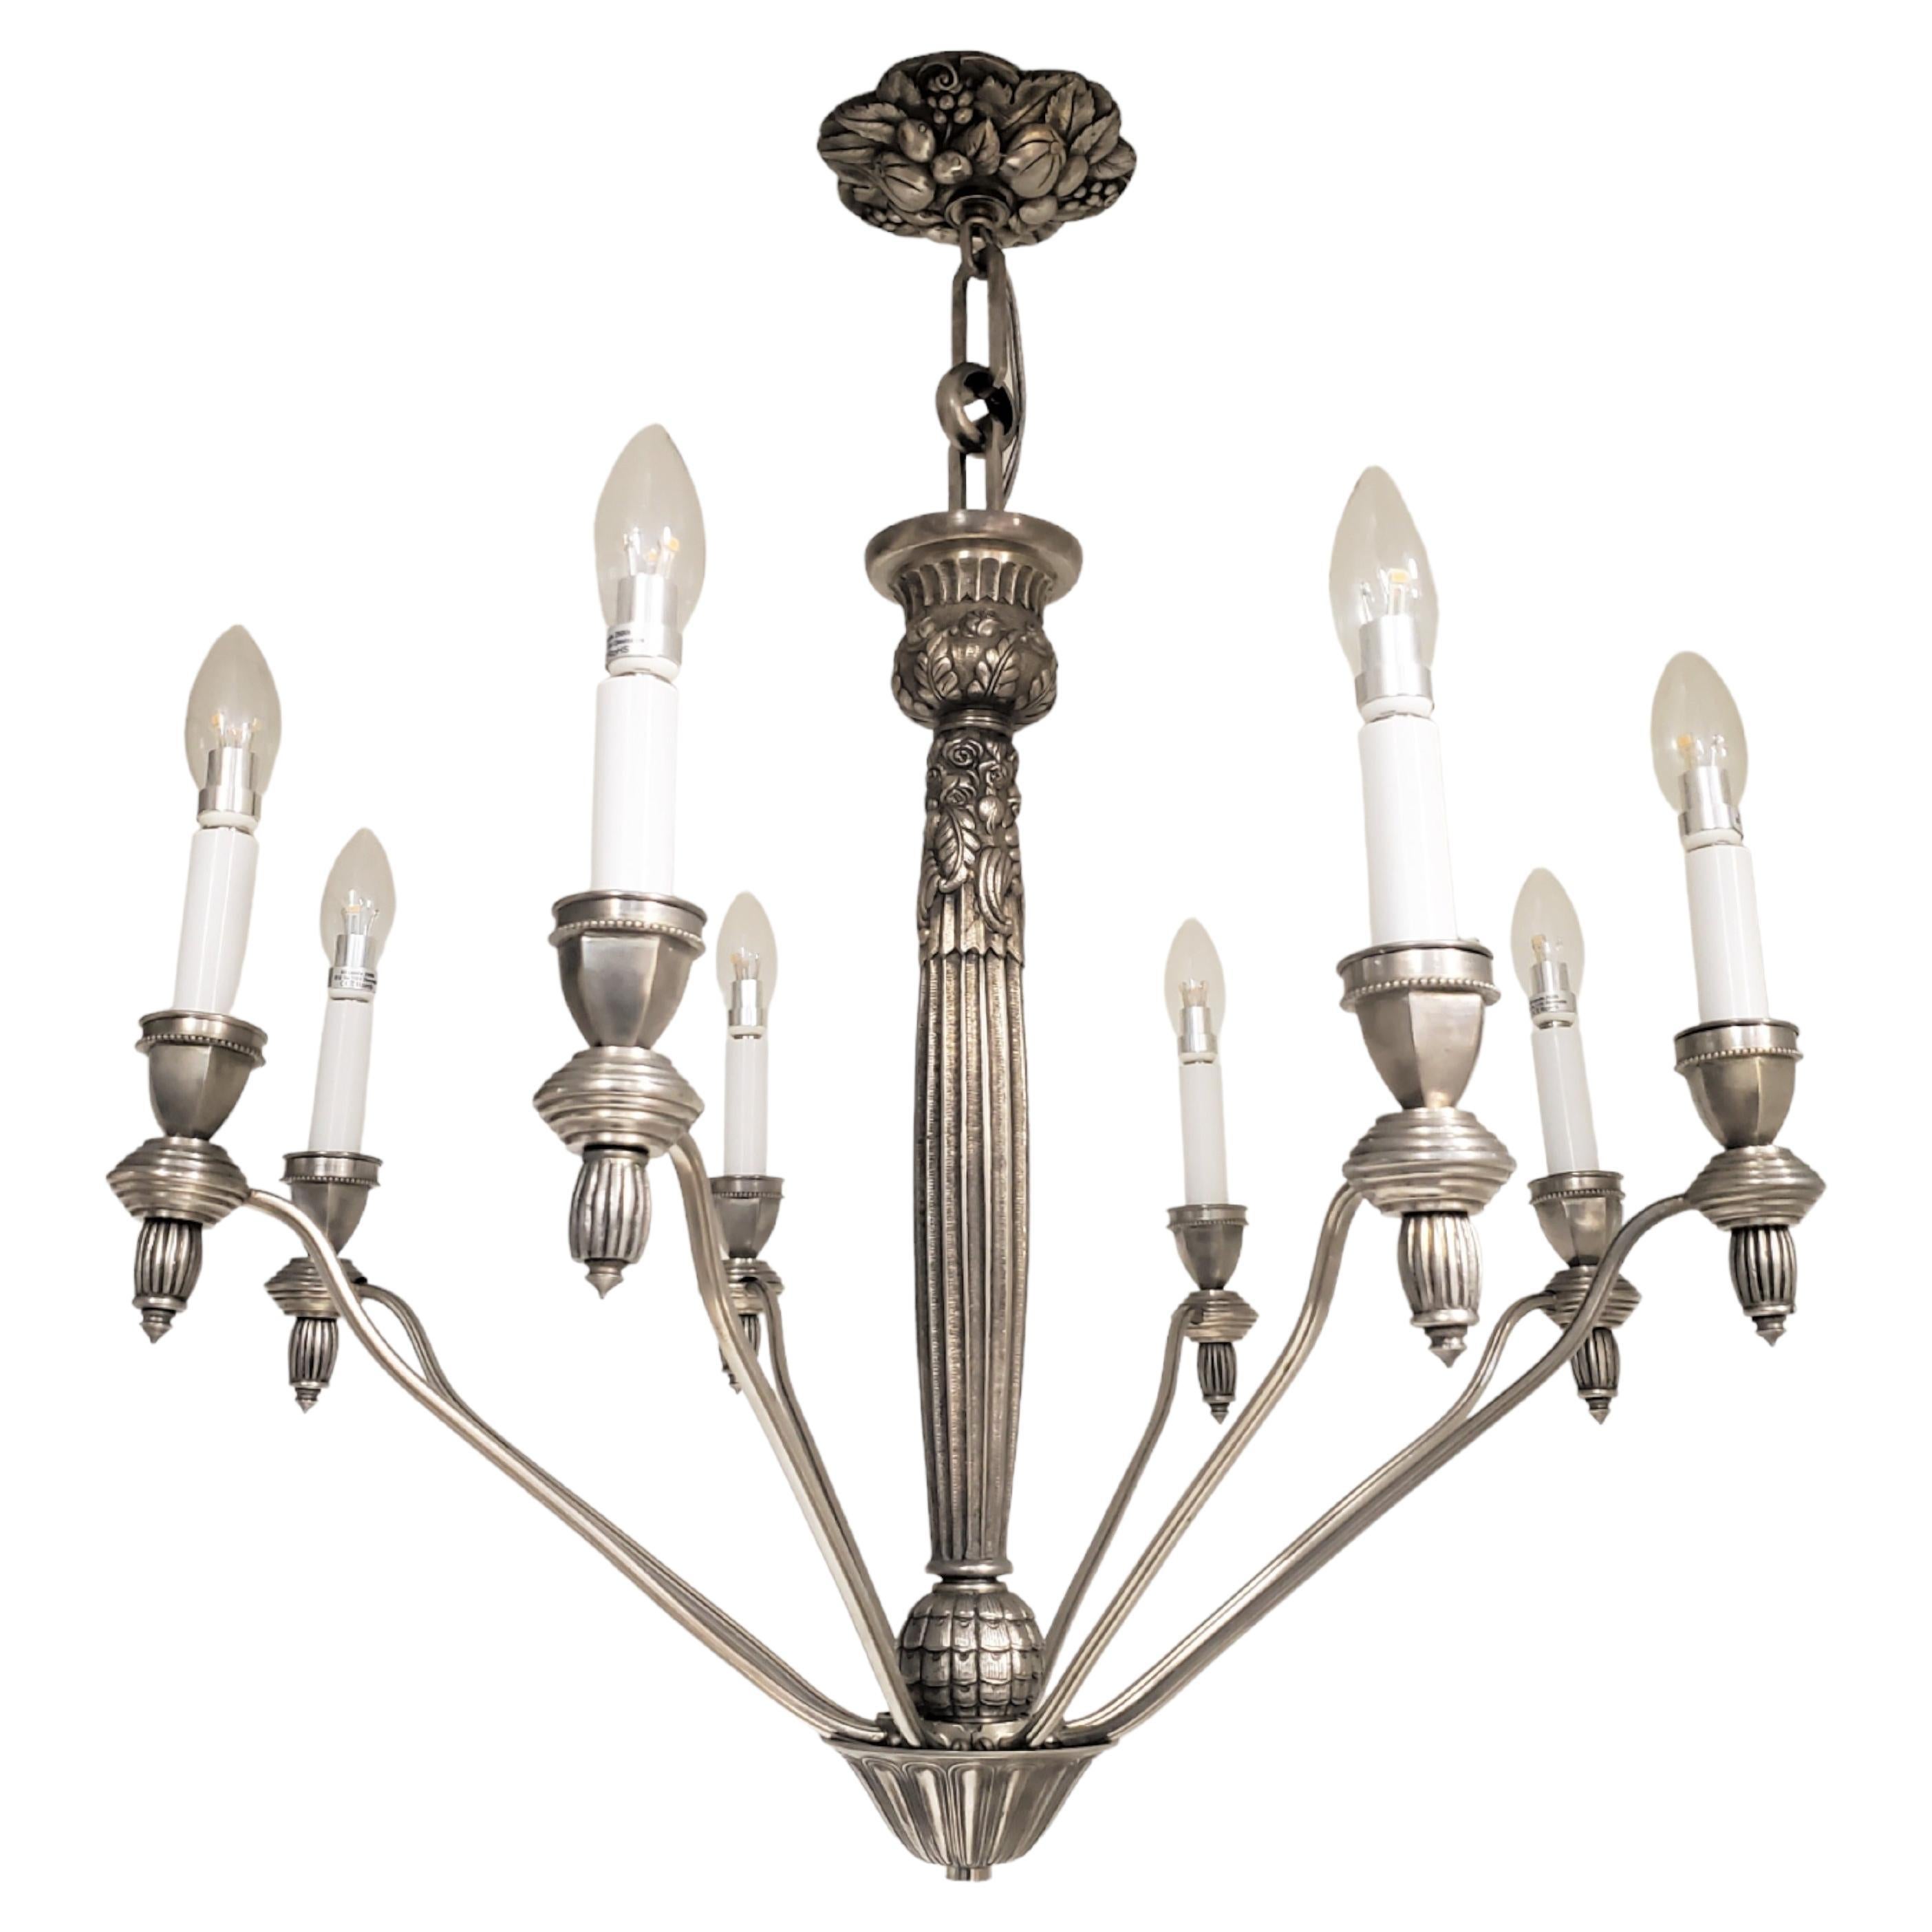 French eight arm heavily cast and detailed nickeled bronze chandelier - G.Capon  For Sale